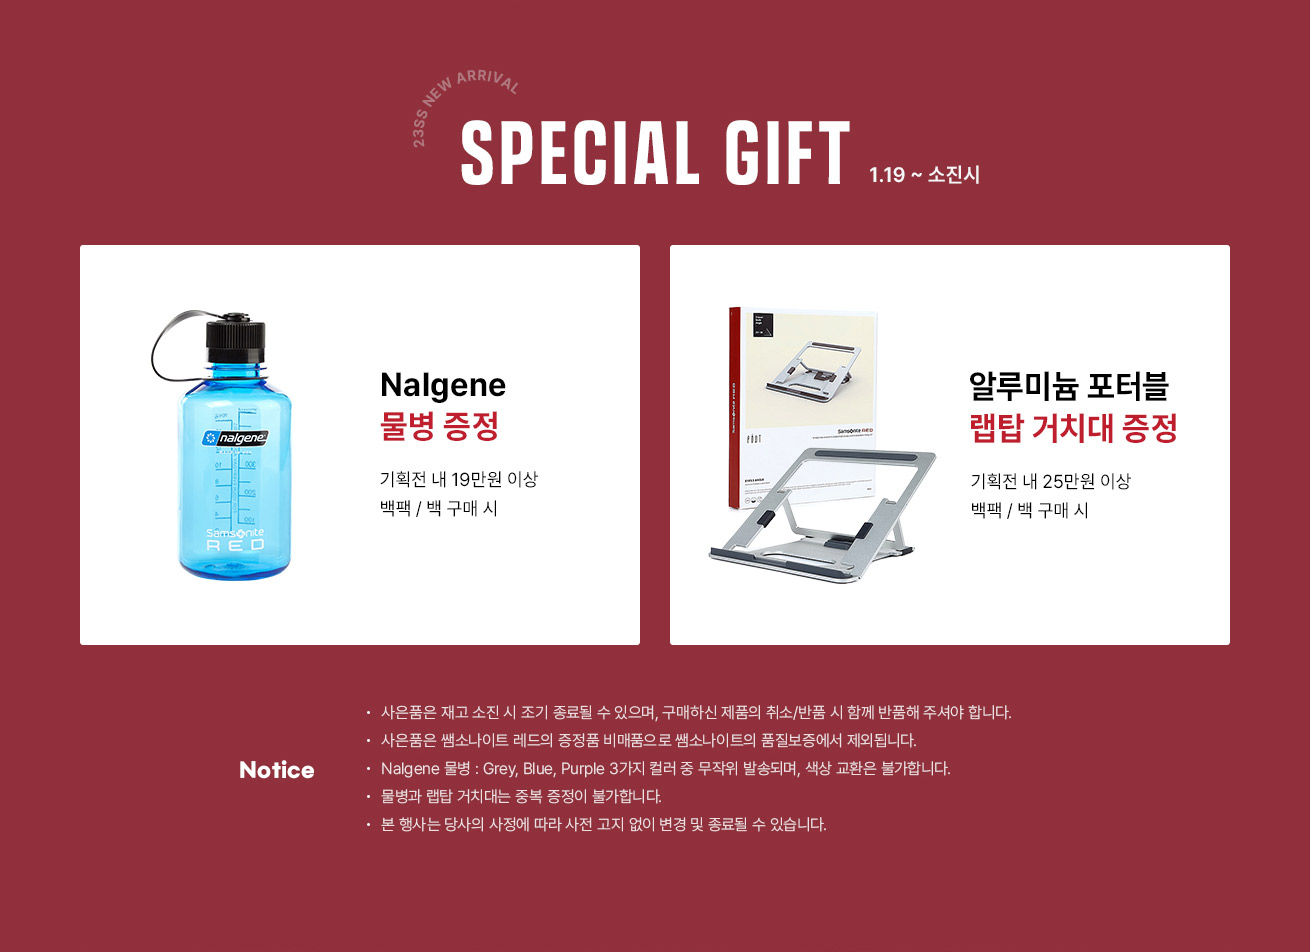 Special Gift, 1.19 ~ 소진시